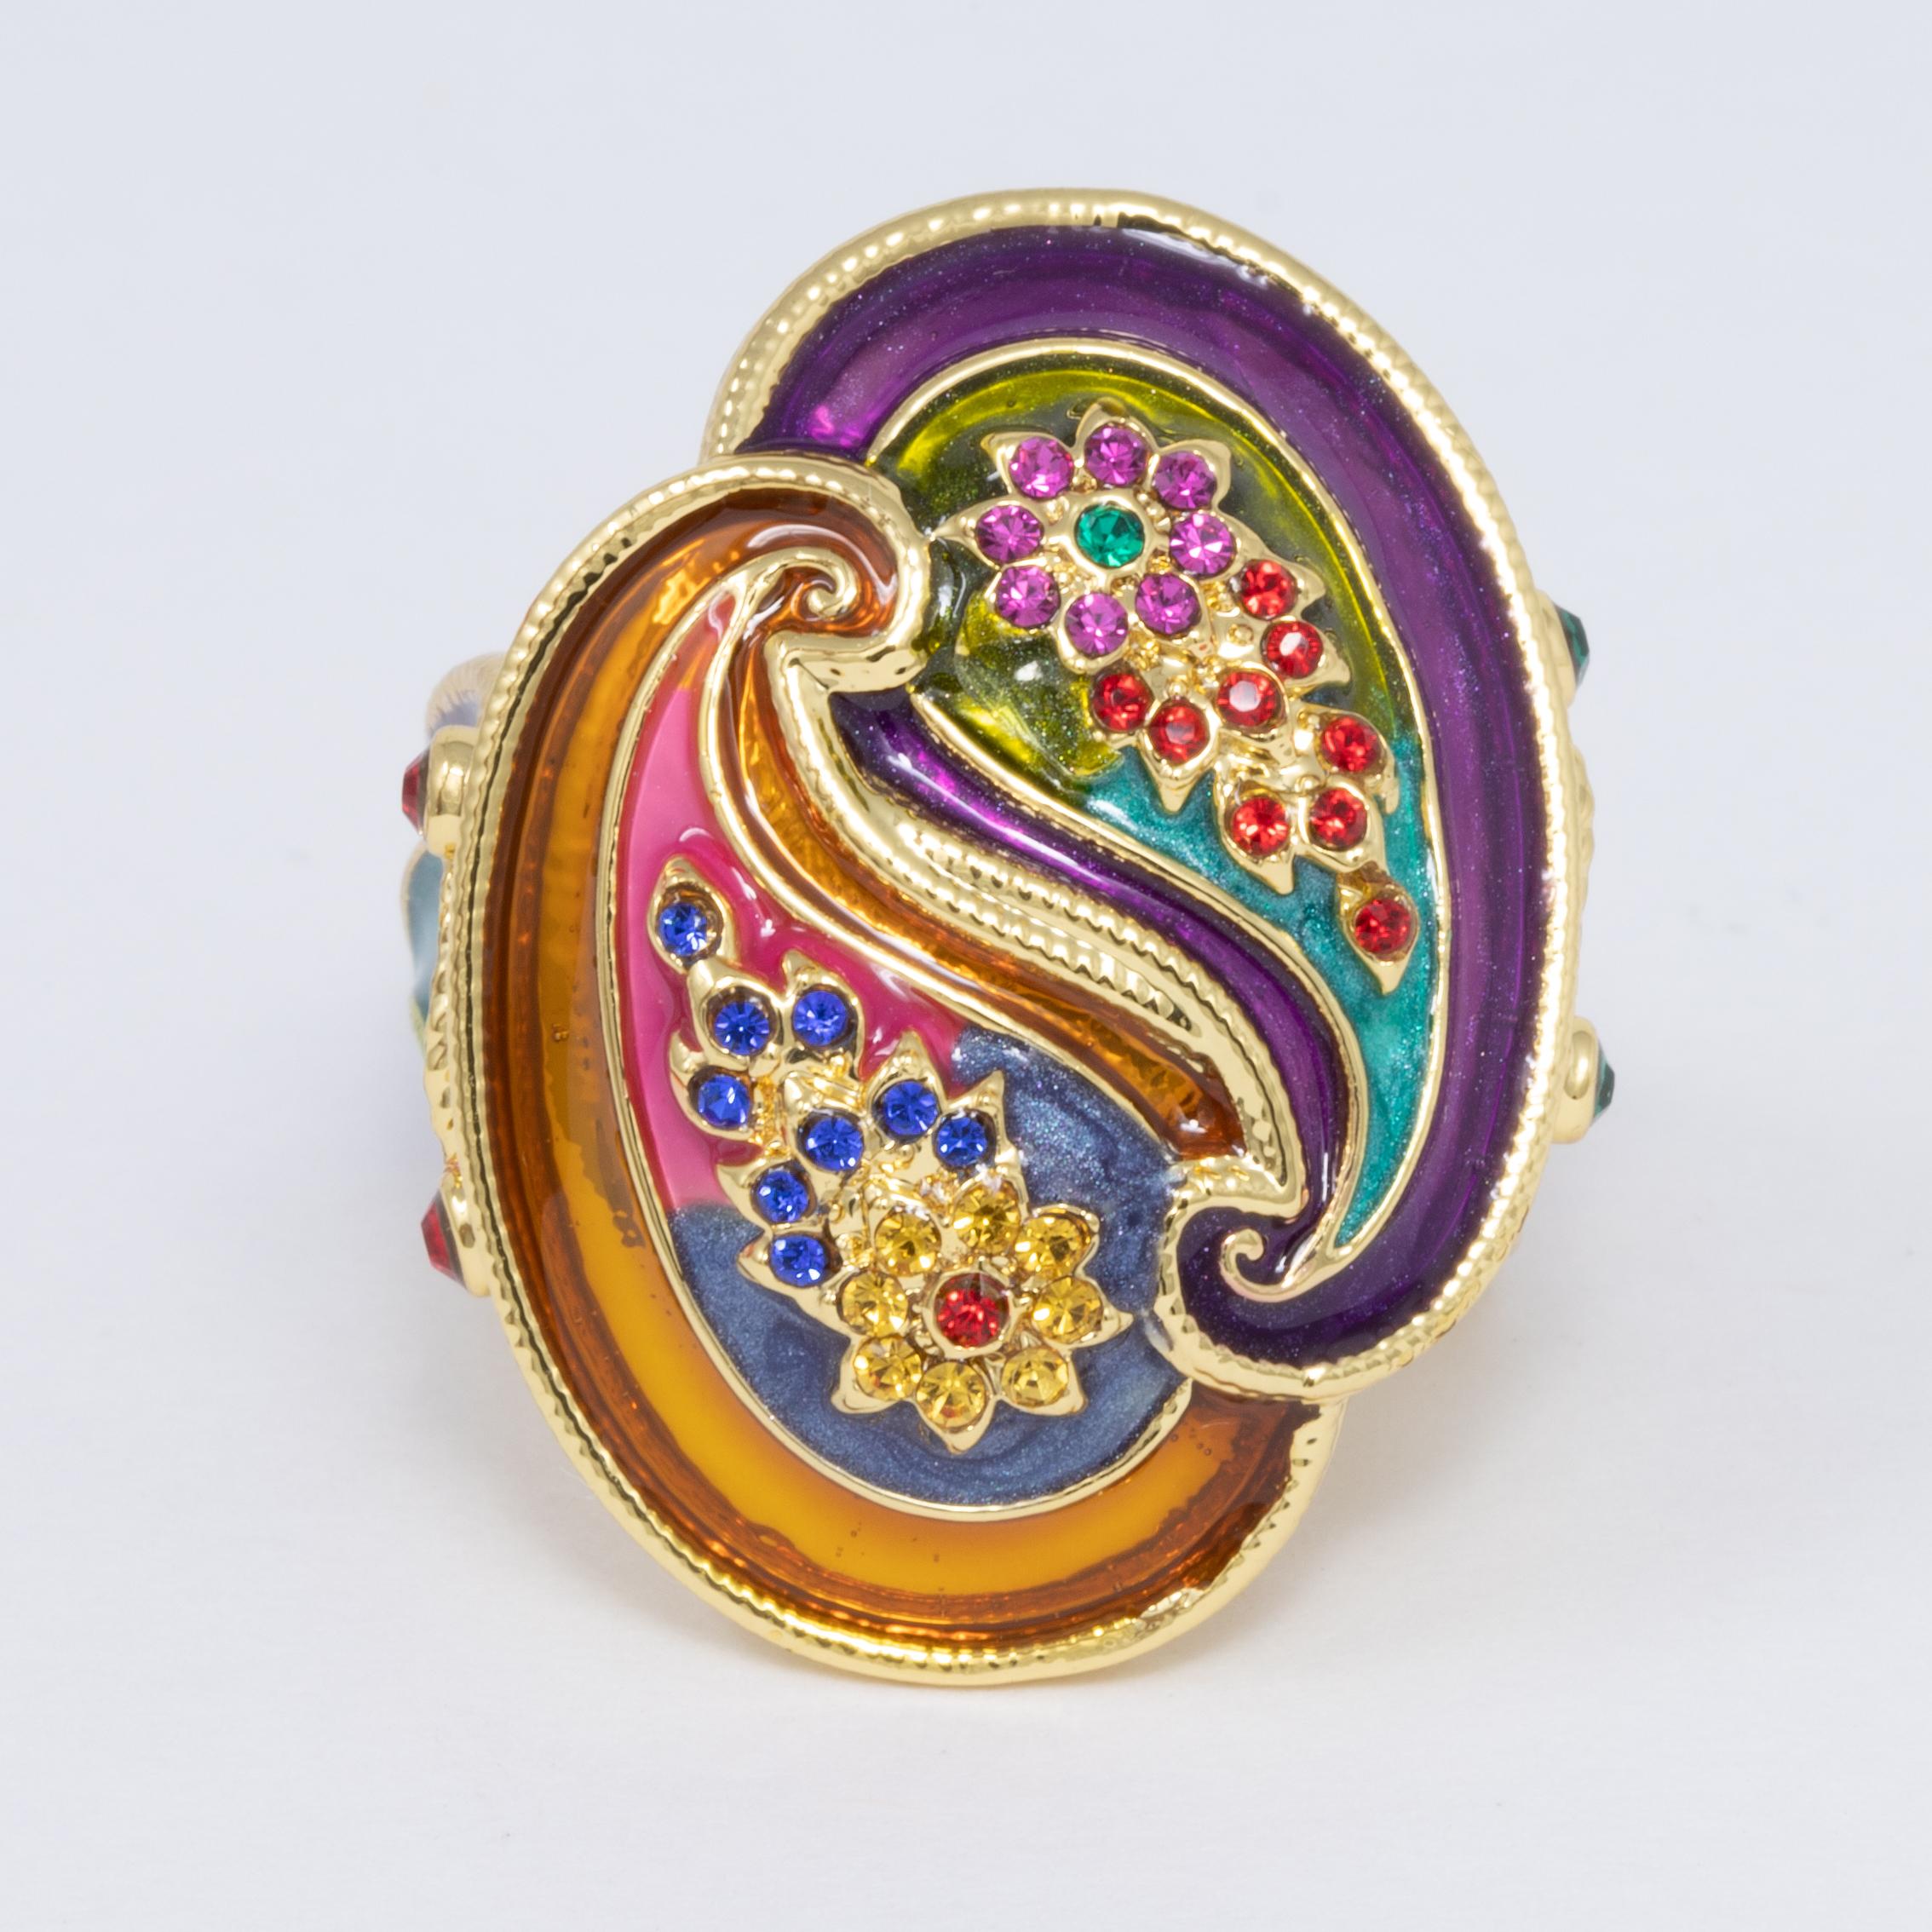 An extravagant statement ring by Jay Strongwater. This stylish accessory features a elevated twin paisley design, painted in rich purple, turquoise, and orange enamel & accented with crystals.

Ring size US 7.25

Hallmarks: Jay, Jay Strongwater,